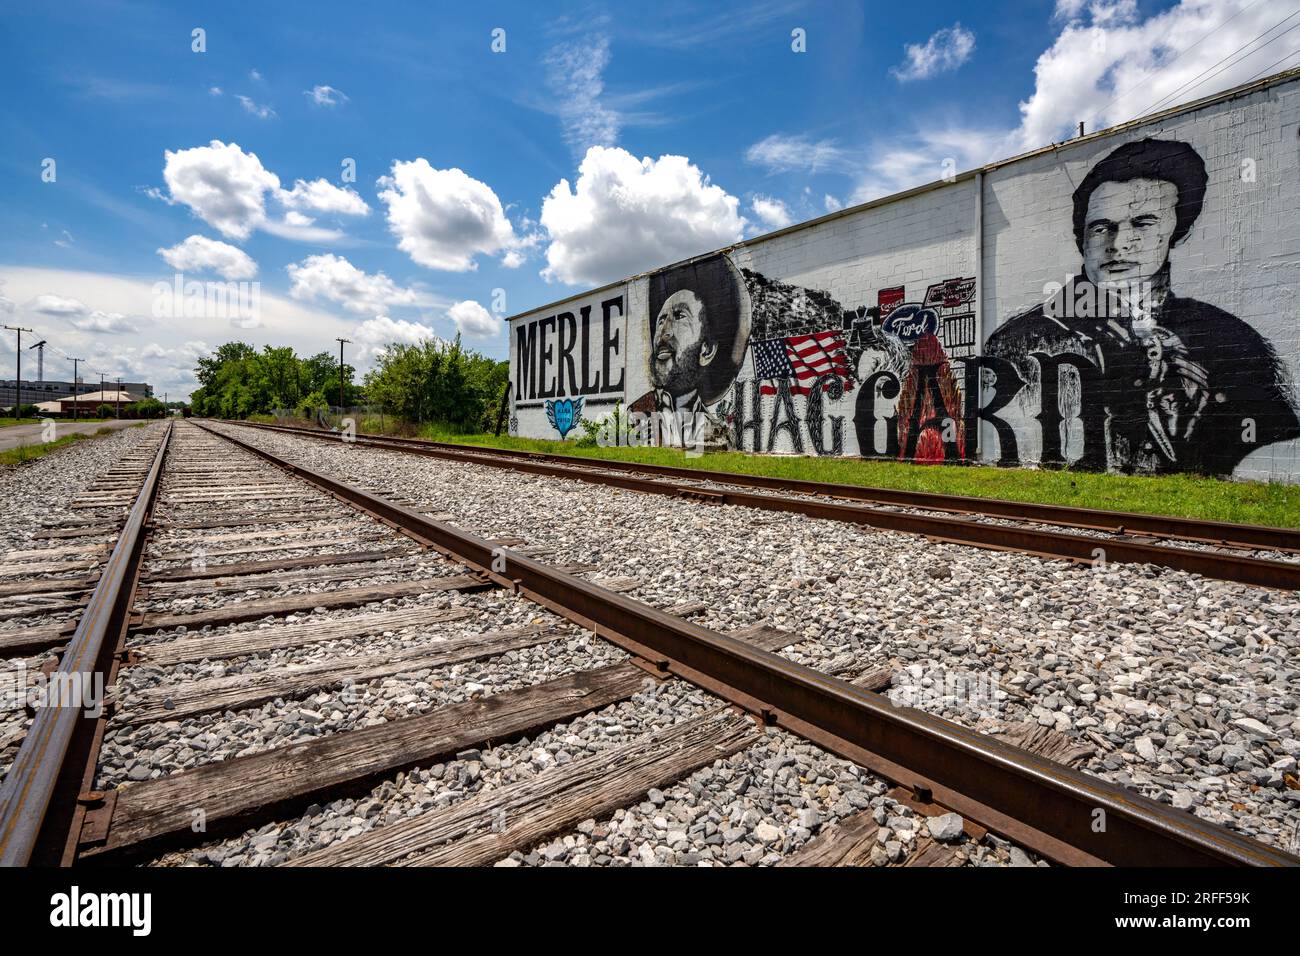 United States, Tennessee, Memphis, murals, country singer Merle Haggard Stock Photo